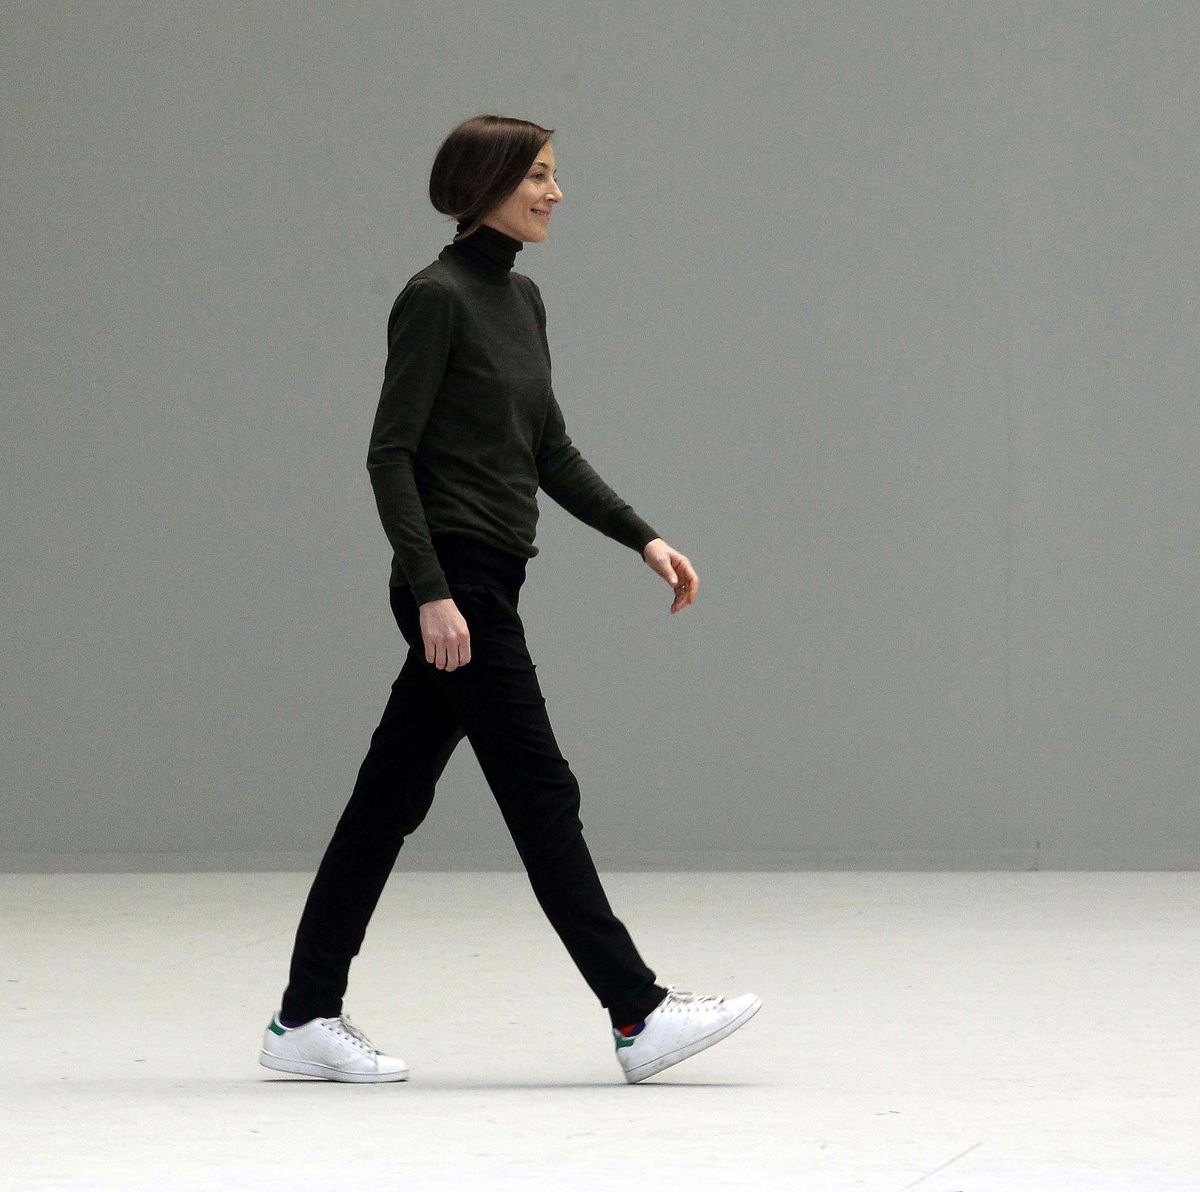 Phoebe Philo Returns to Fashion With Own Brand